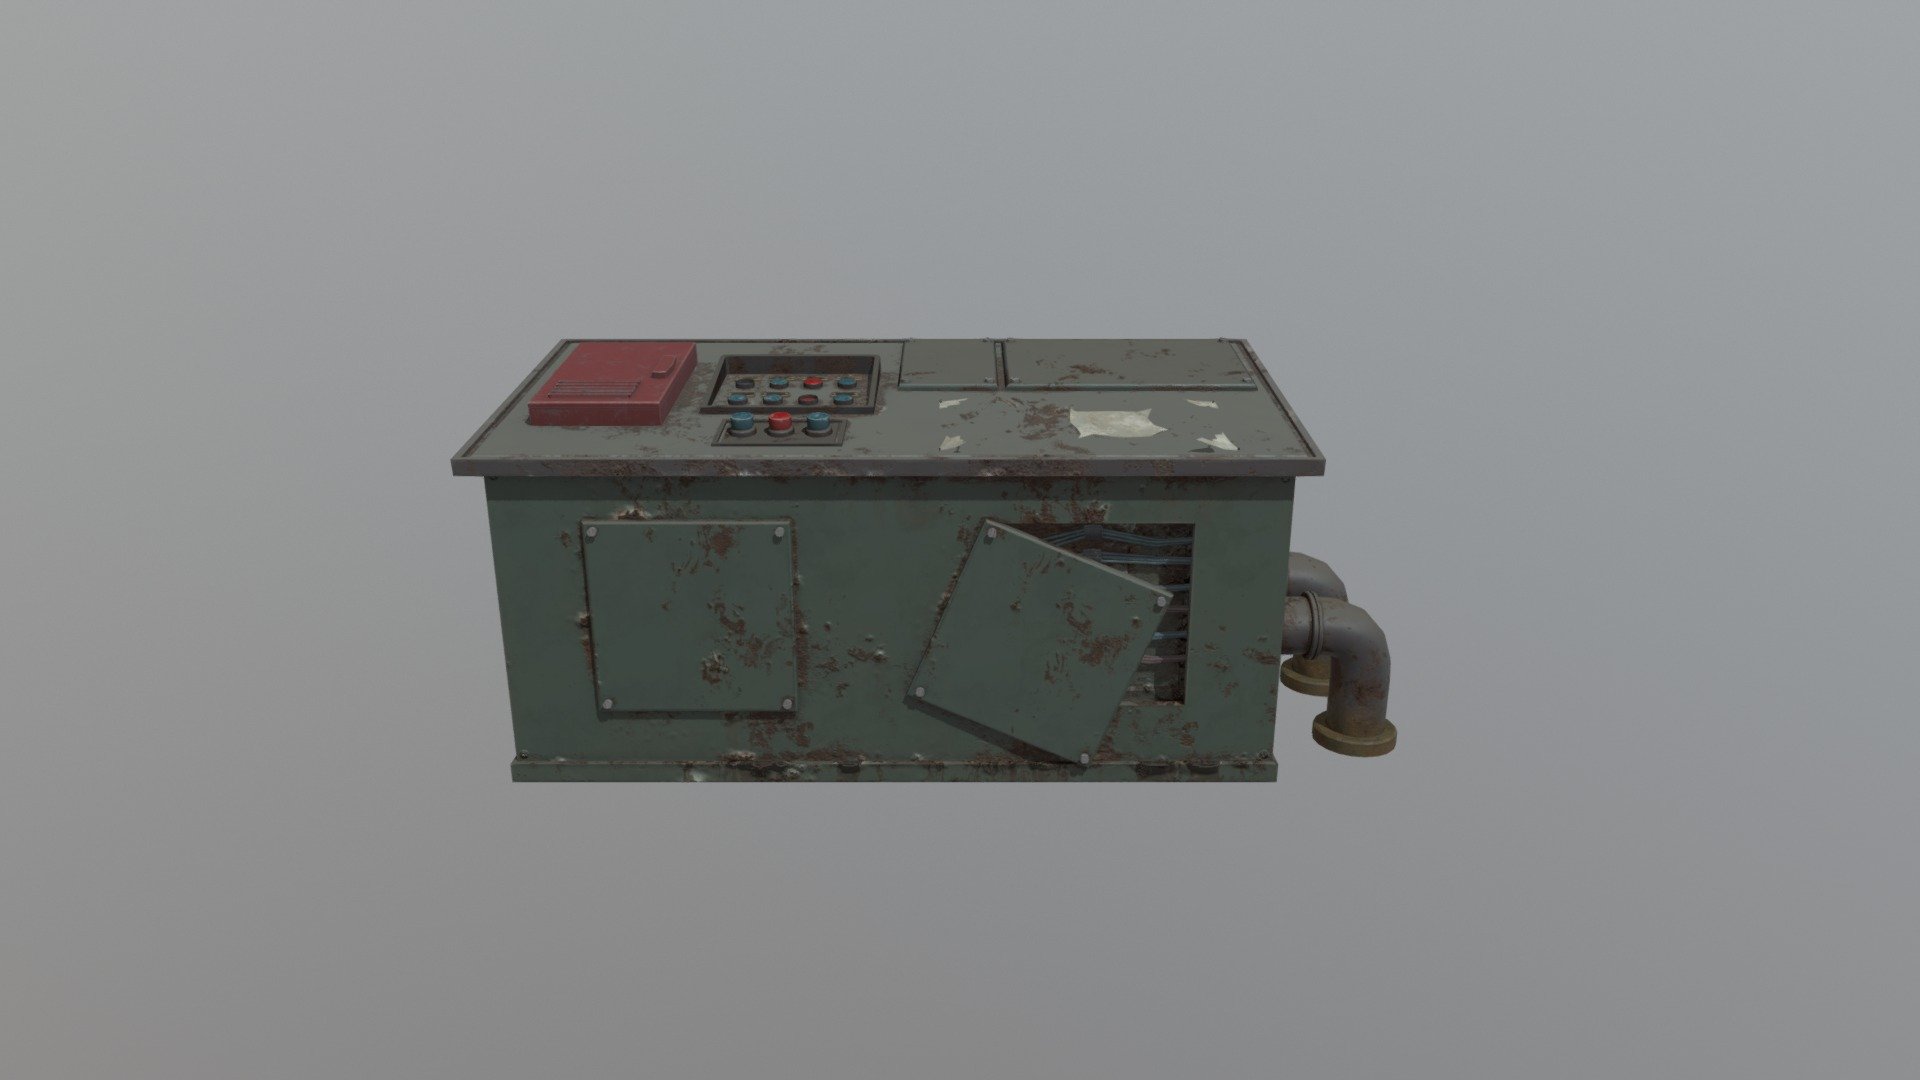 Rusted Workstation